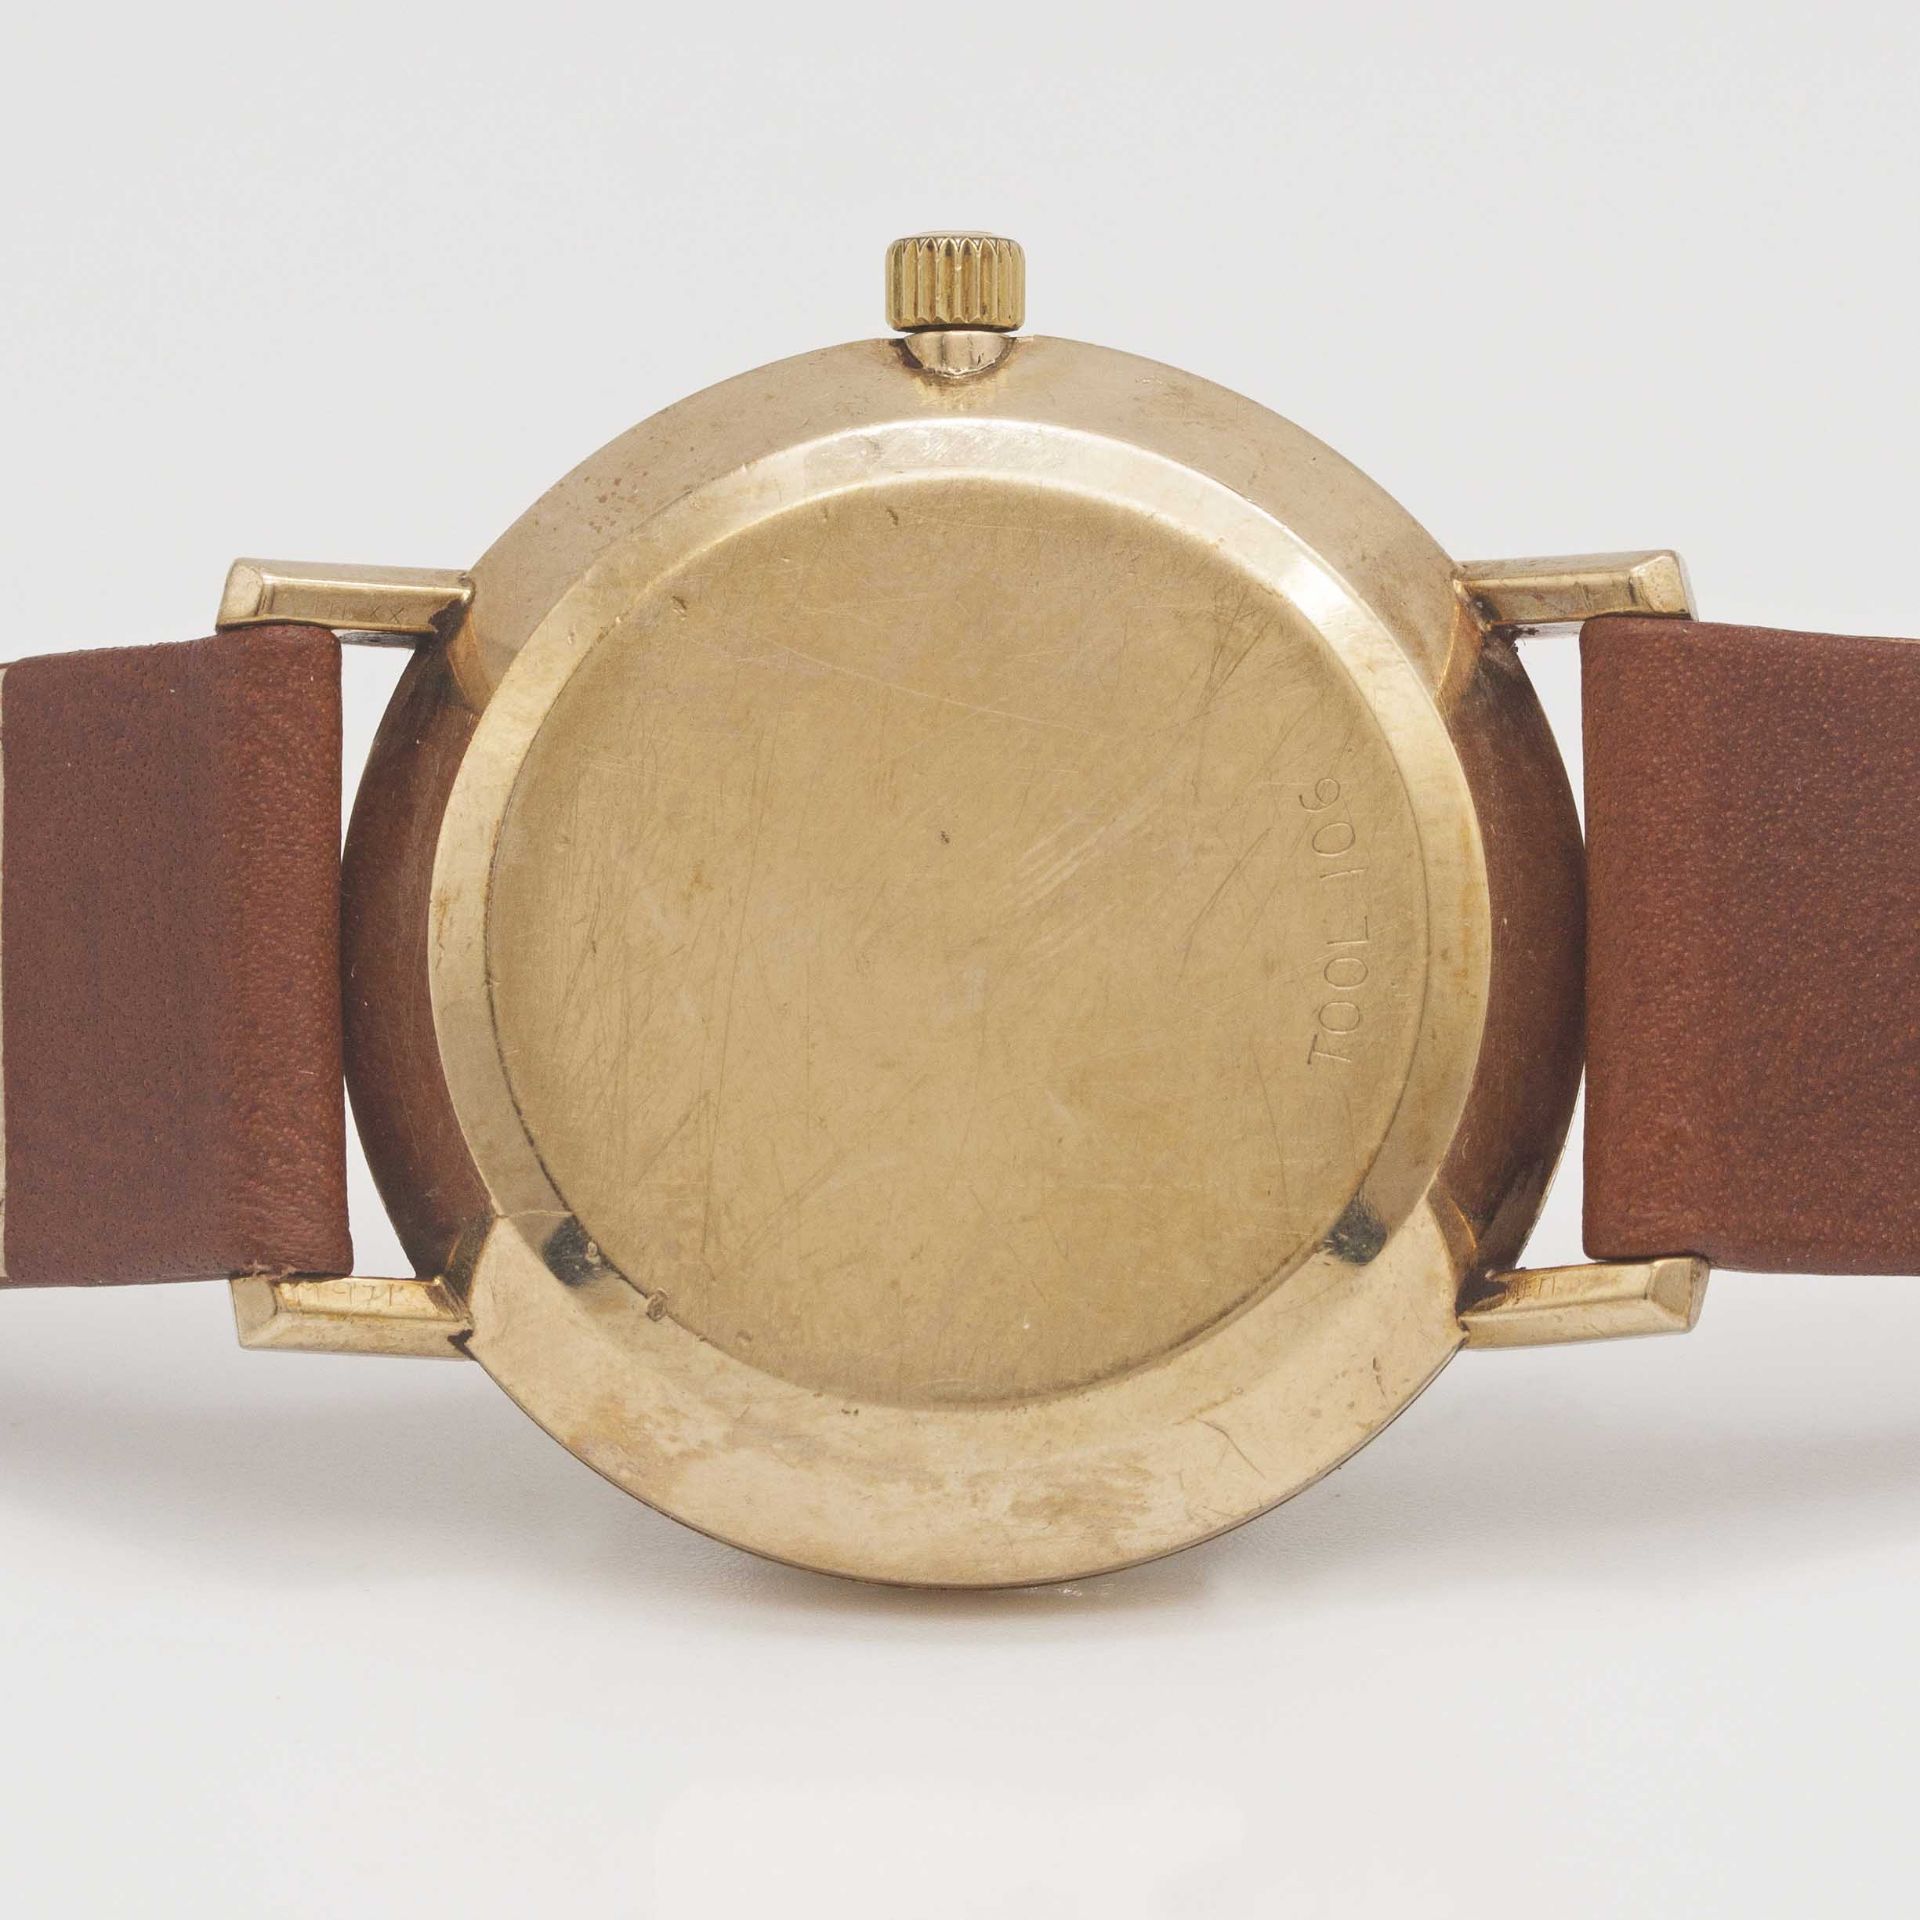 A GENTLEMAN'S 9CT SOLID GOLD OMEGA AUTOMATIC DE VILLE WRIST WATCH CIRCA 1973, REF. 166.5161 - Image 6 of 8